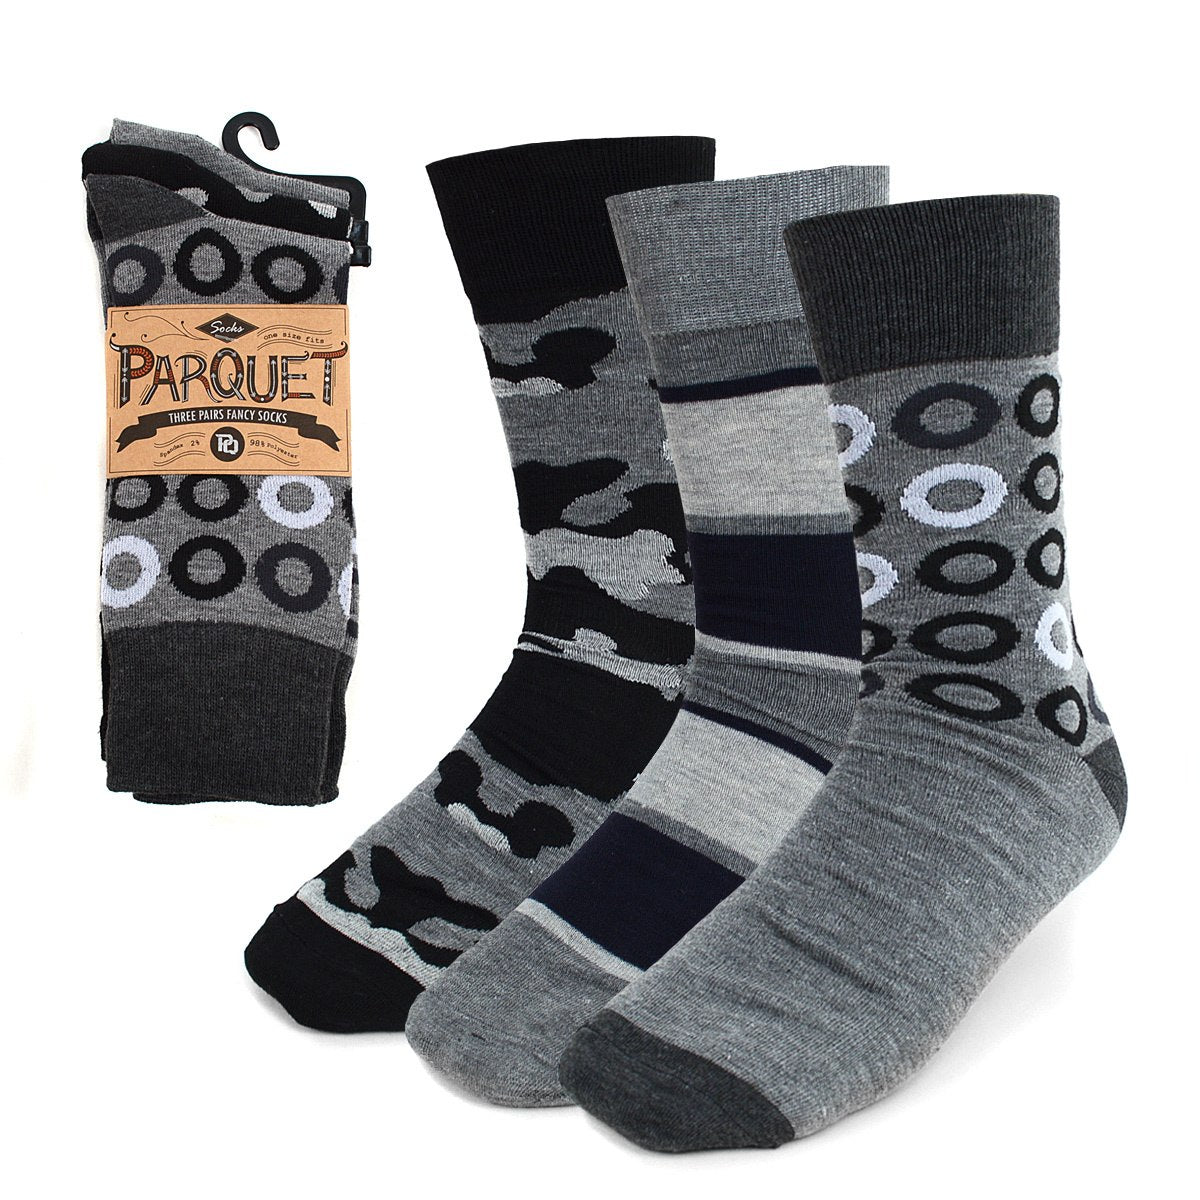 Parquet Men's Fancy, Dress, Casual and Crew Fun Socks - 3 Pair Bundle in Abstract Greys